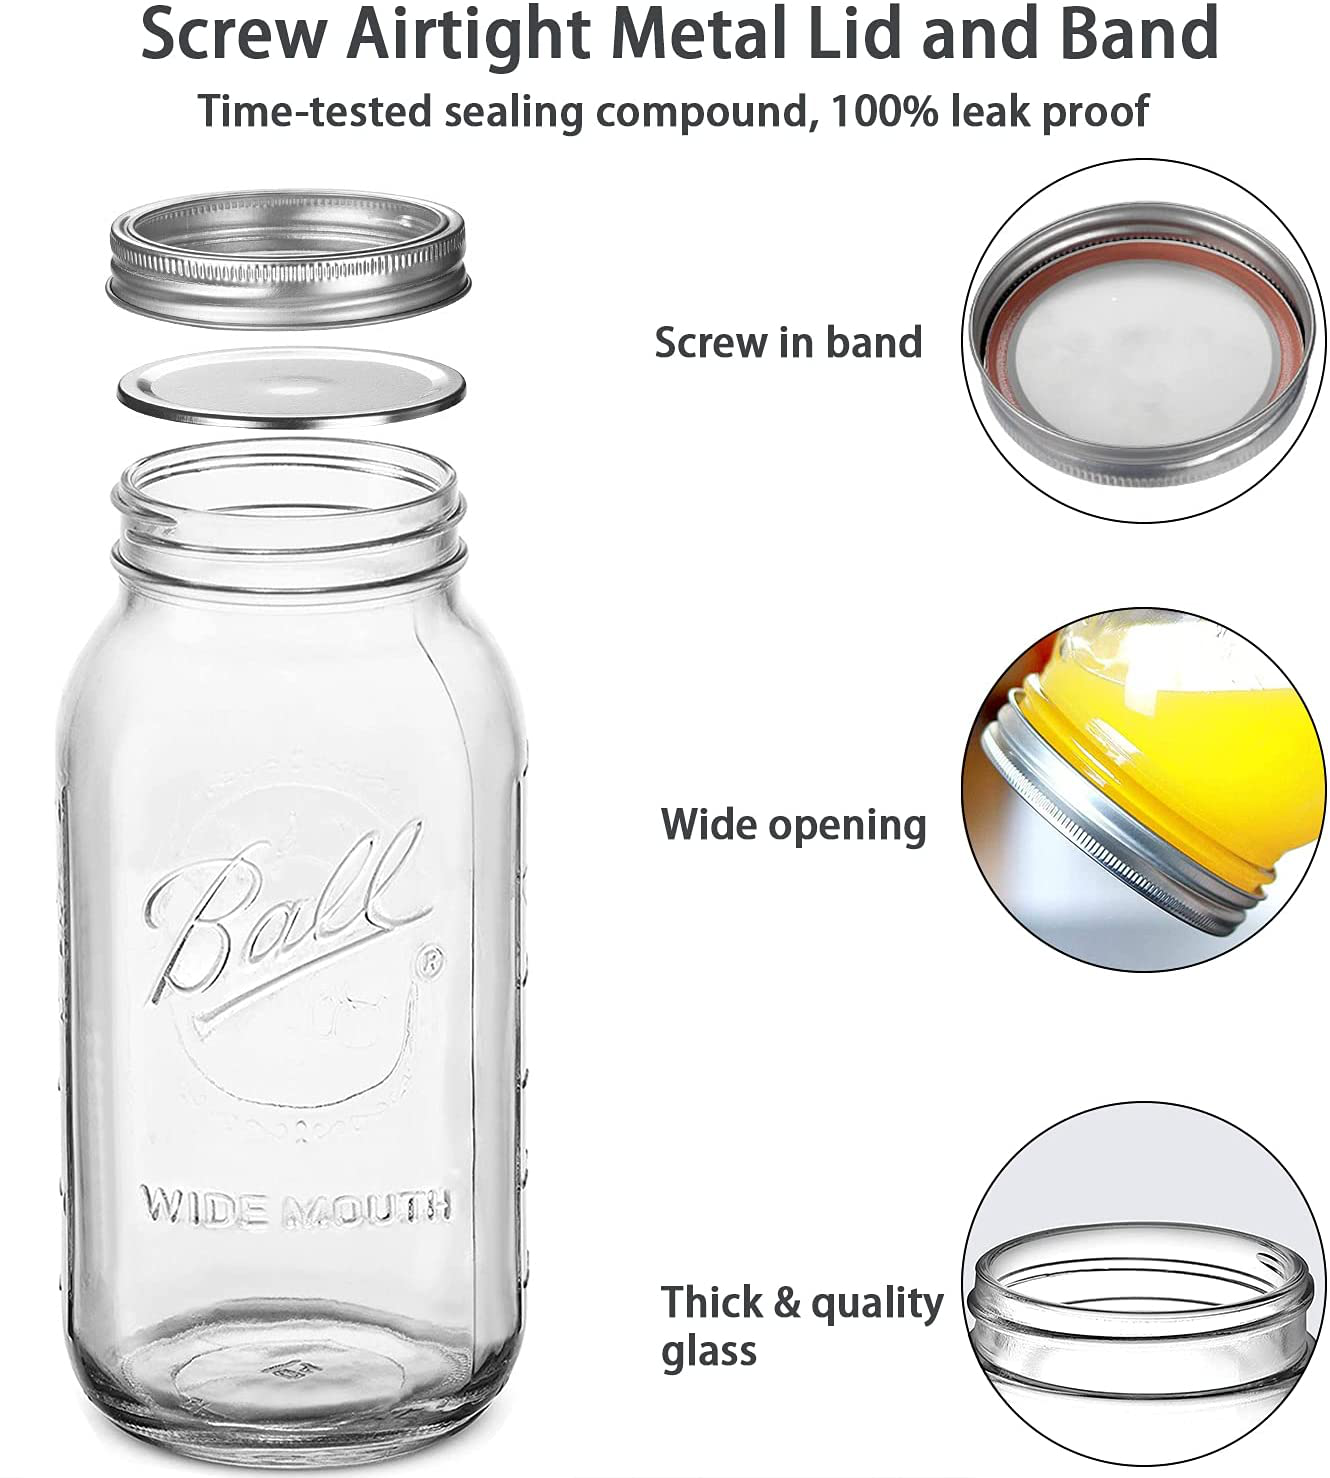 Wide Mouth Mason Jars 64 oz 2 Pack Half Gallon Mason Jars with Airtight Lid and Band, Large Clear Glass Mason Jars for Canning, Fermenting, Pickling, Storing